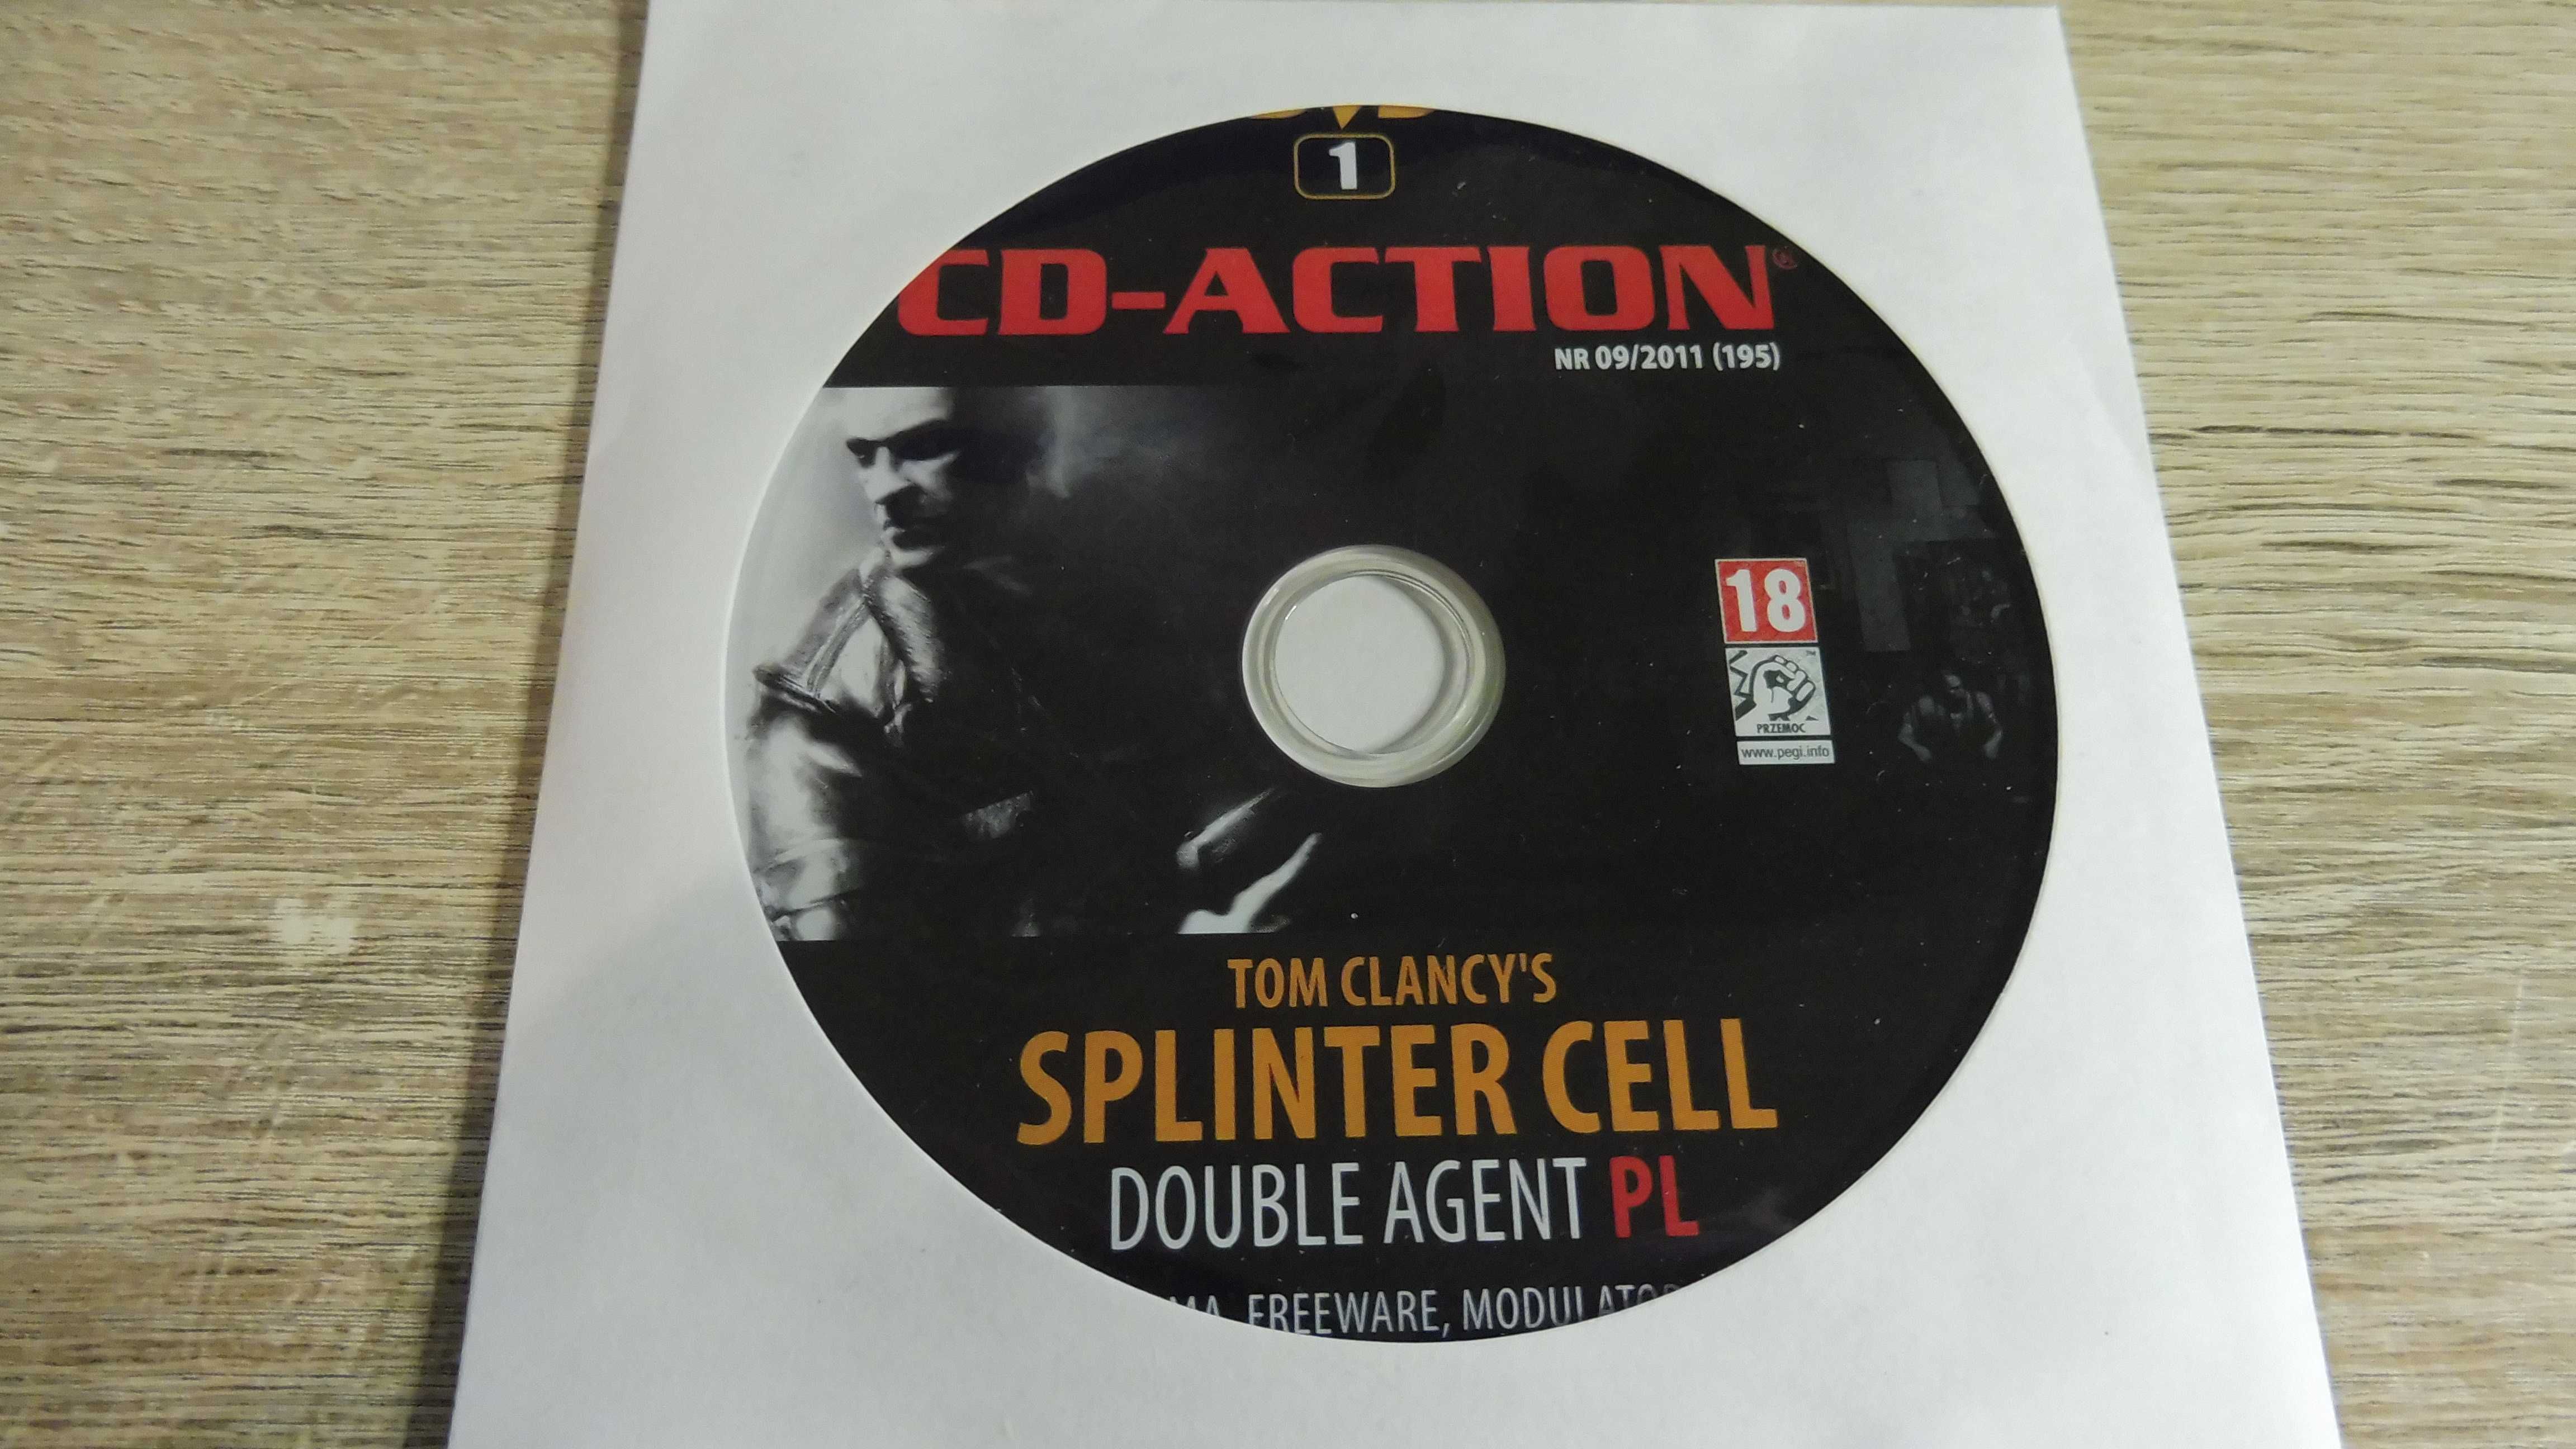 CD Action 09/2011 (195) - Splinter Cell Double Agent